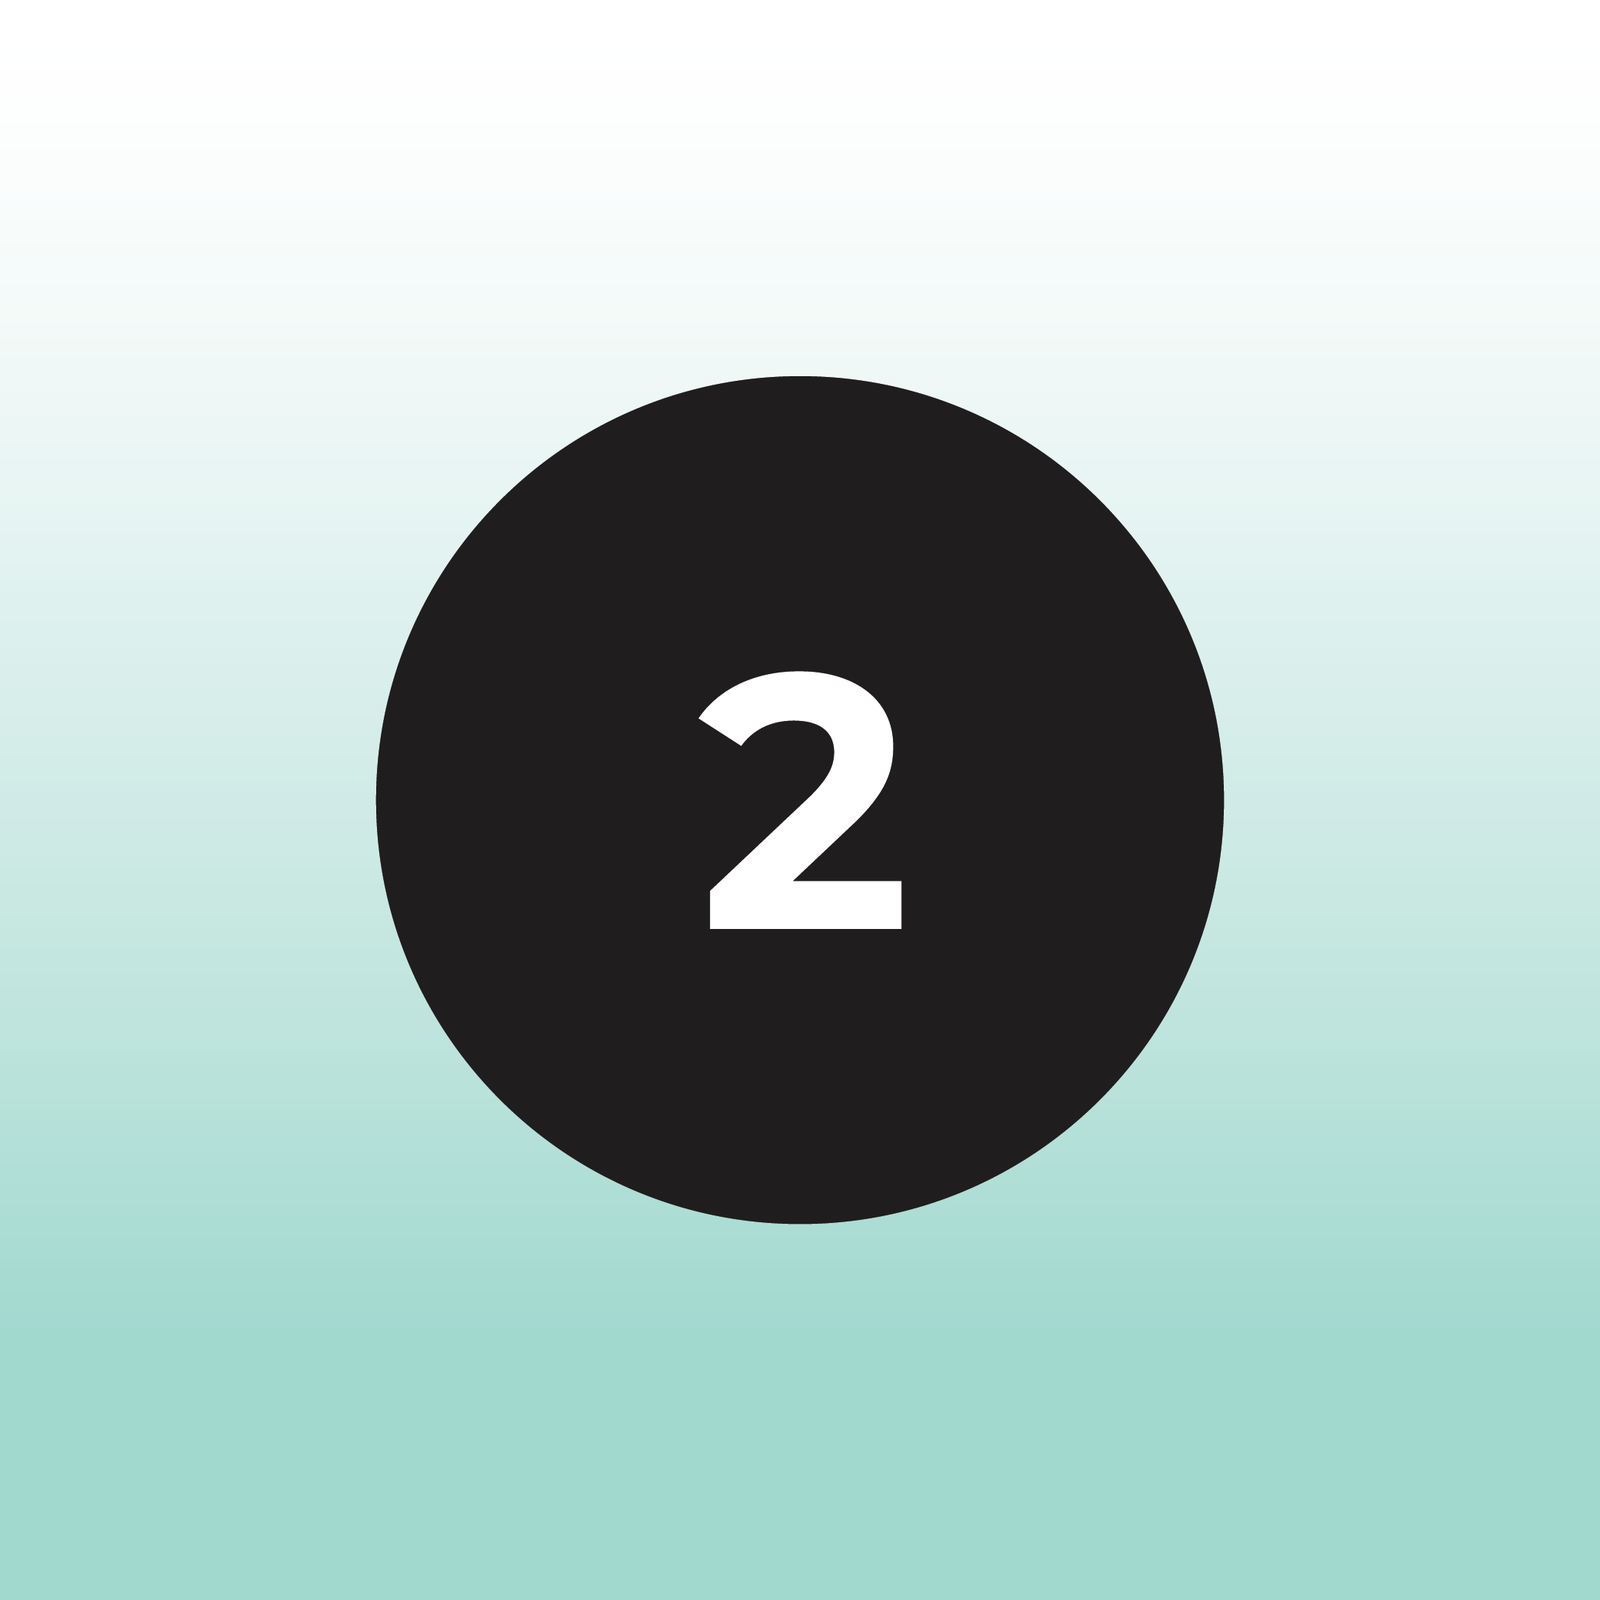 teal gradient background with a black circle and the number 2 in white in the center